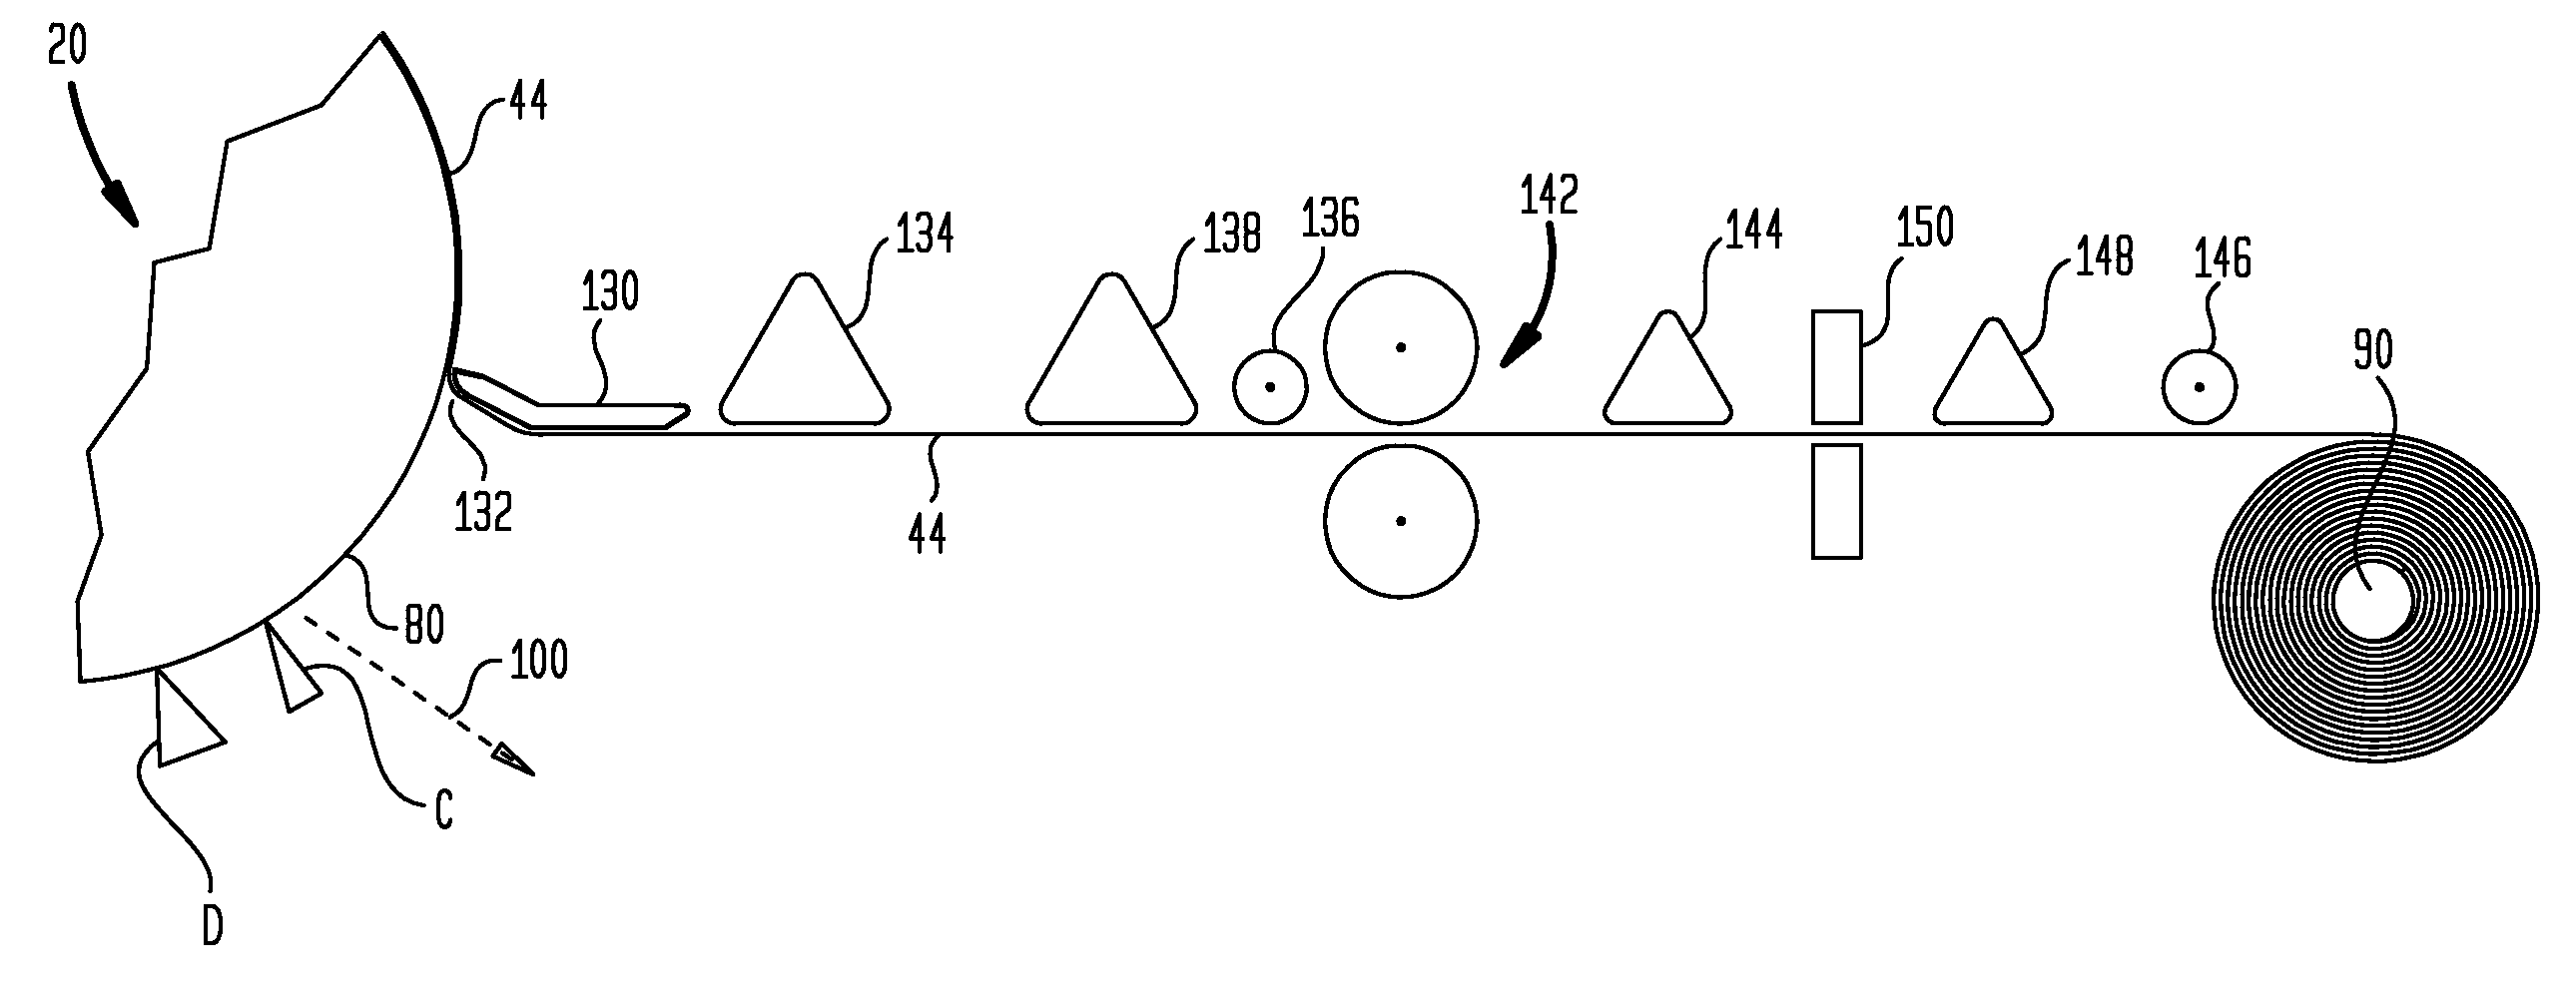 Method Of Controlling Adhesive Build-Up On A Yankee Dryer